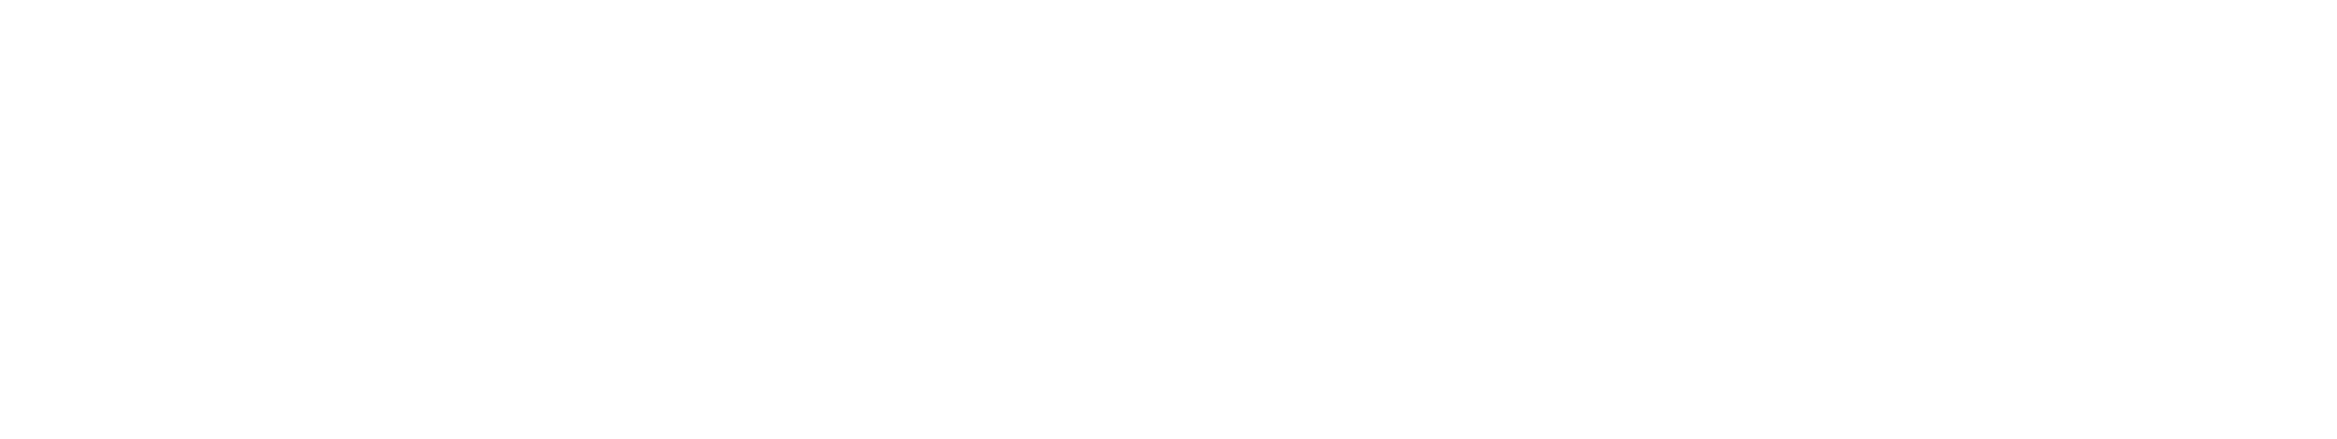 Logo of Missouri Department of Higher Education and Workforce Development